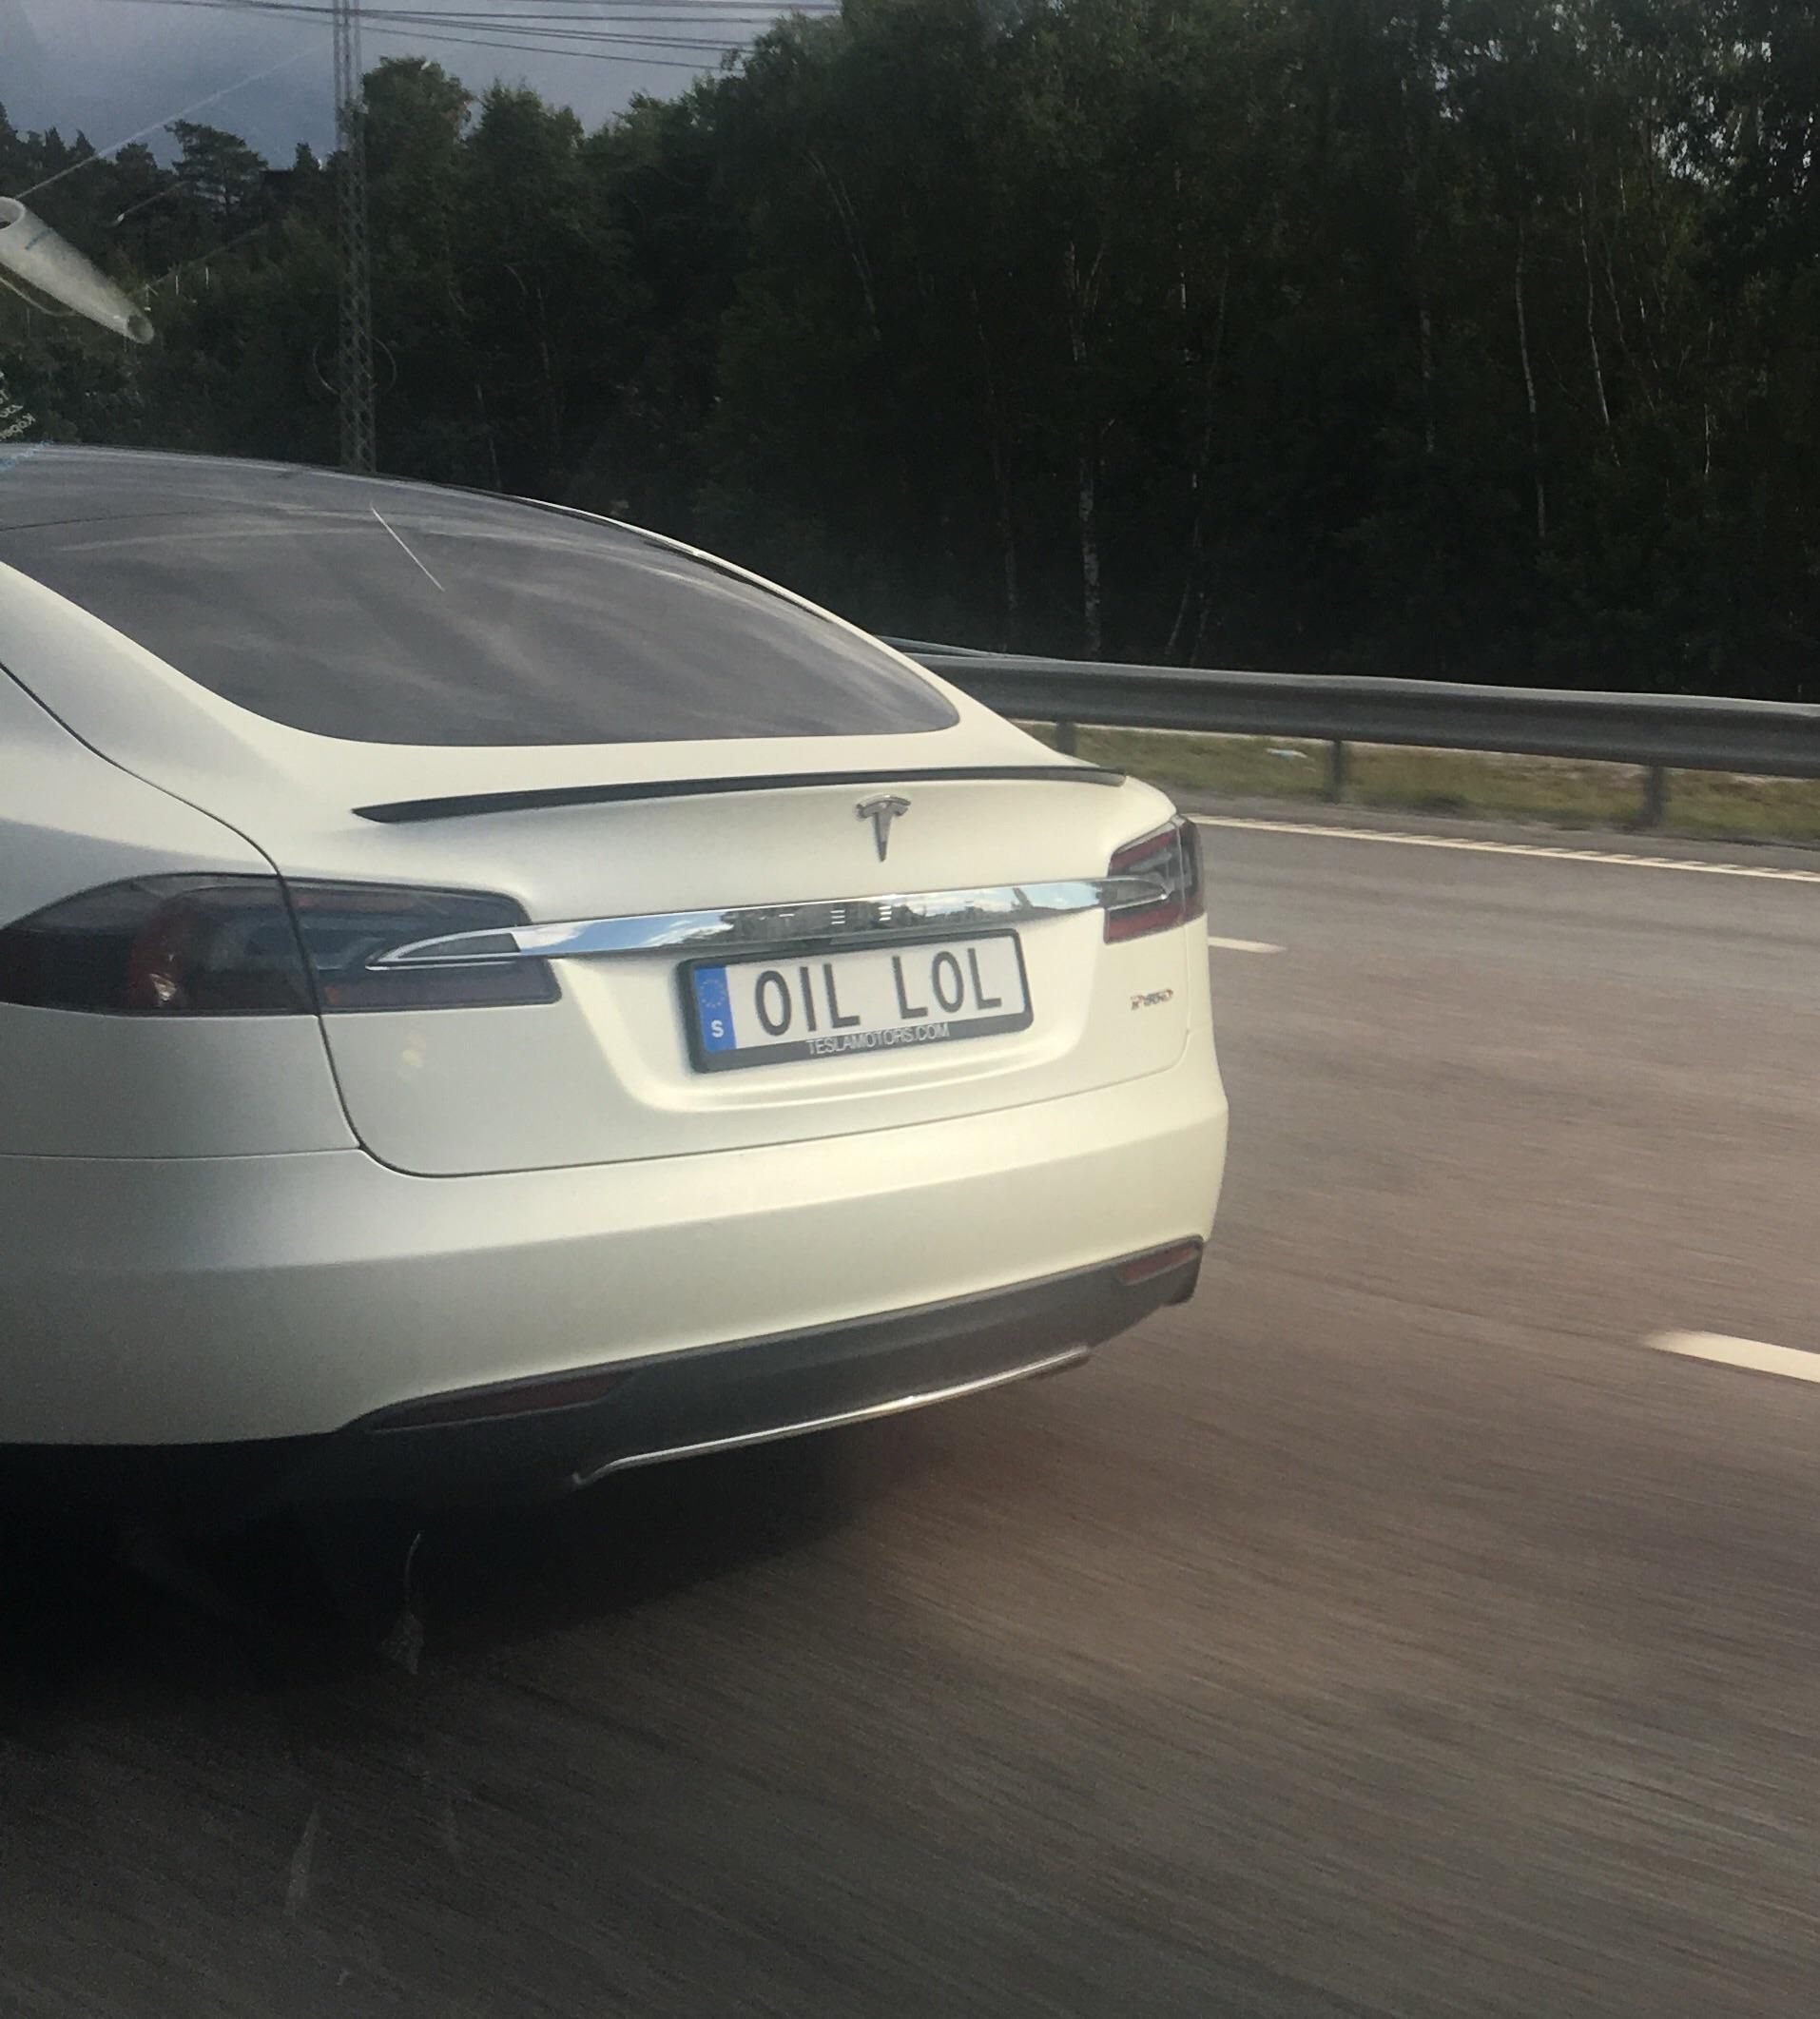 The license plate on this tesla.